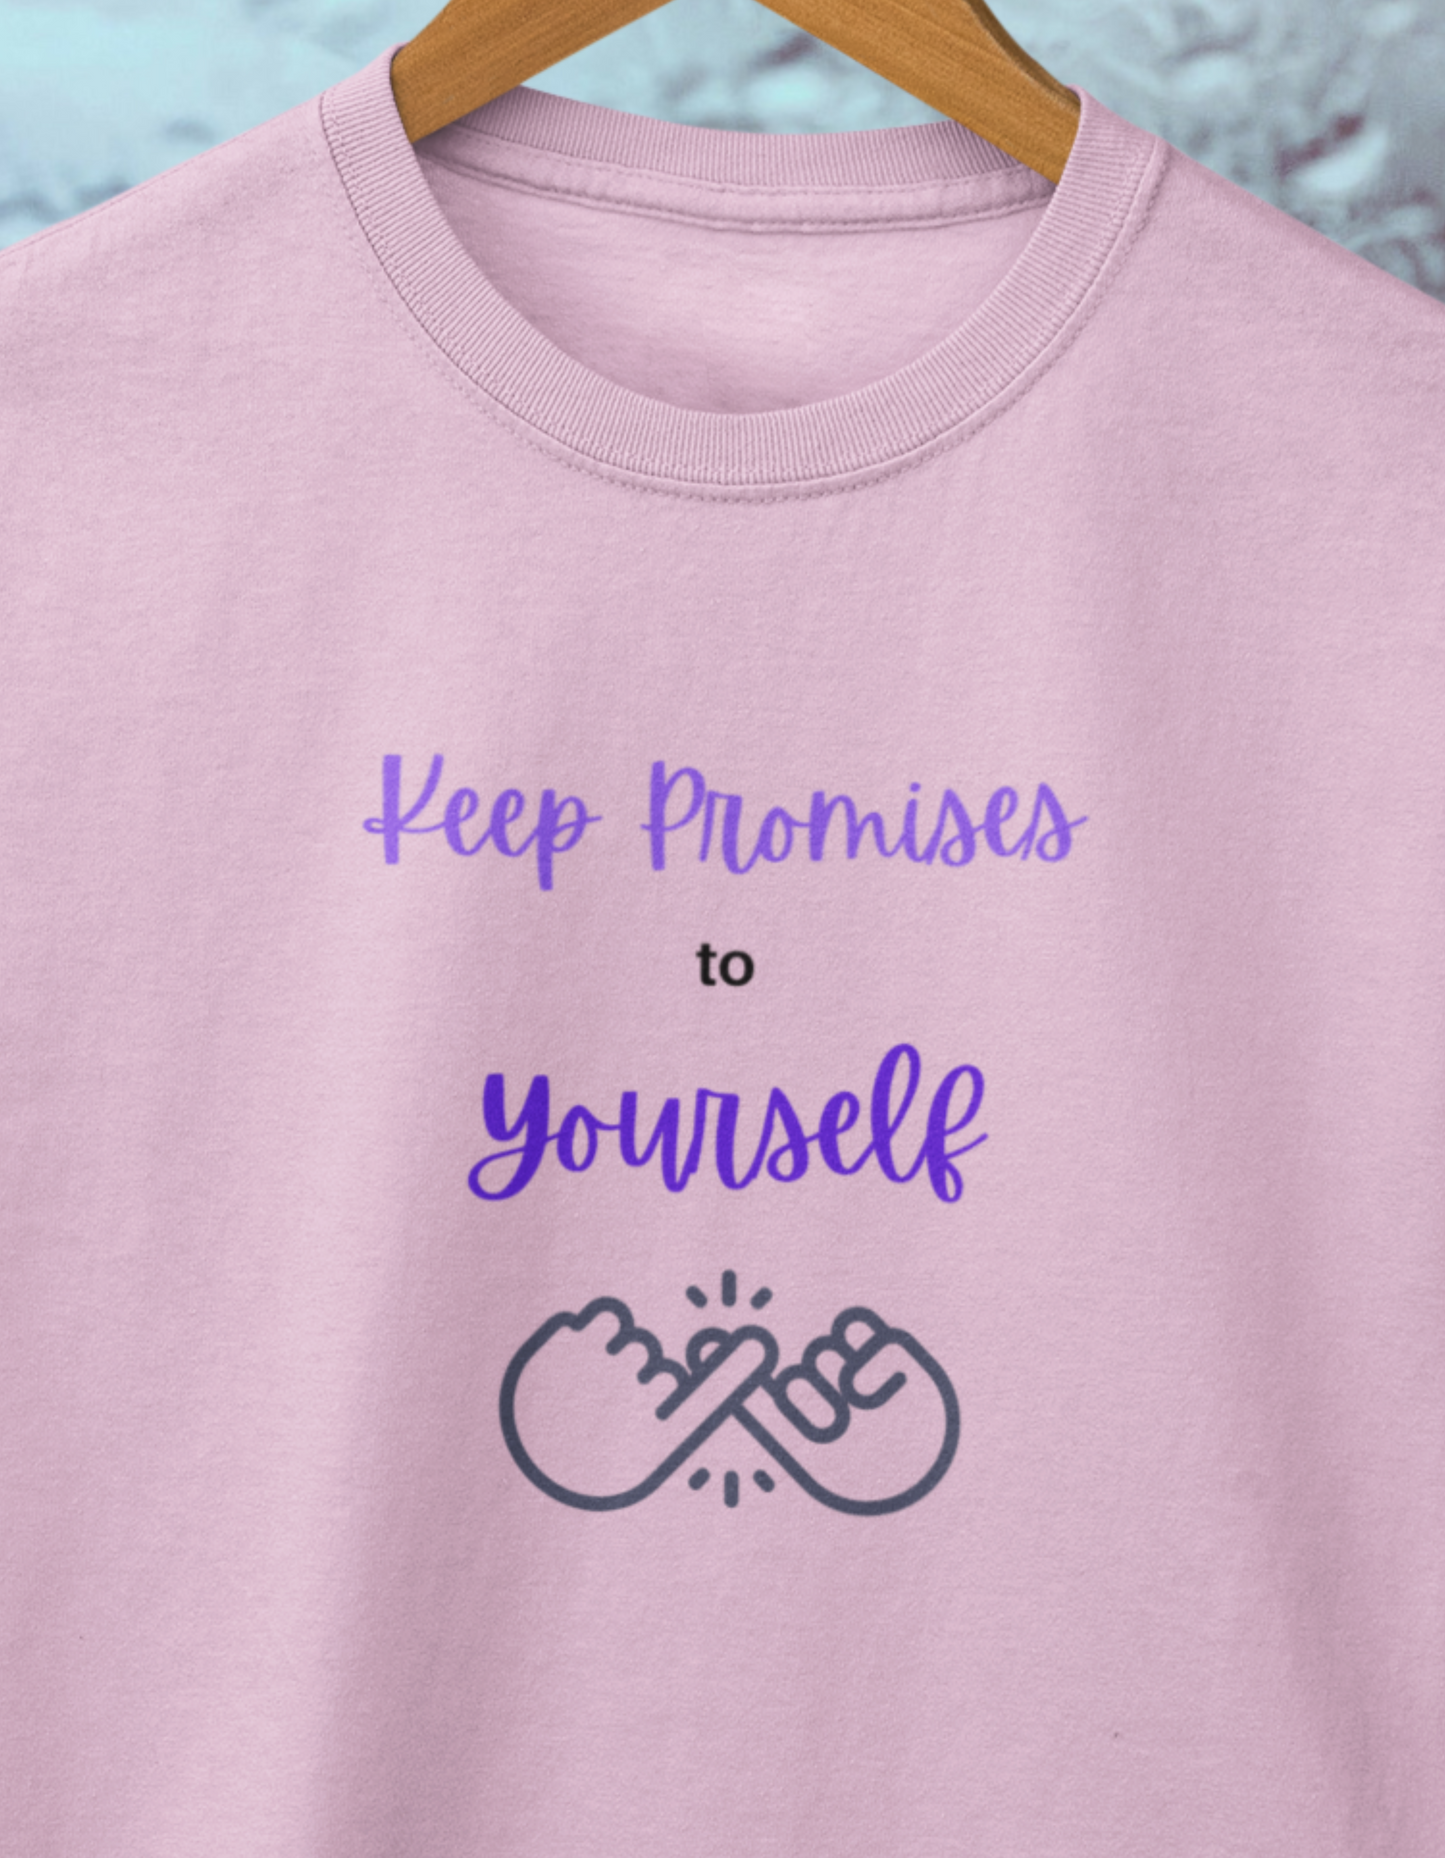 Keep Promises to Yourself